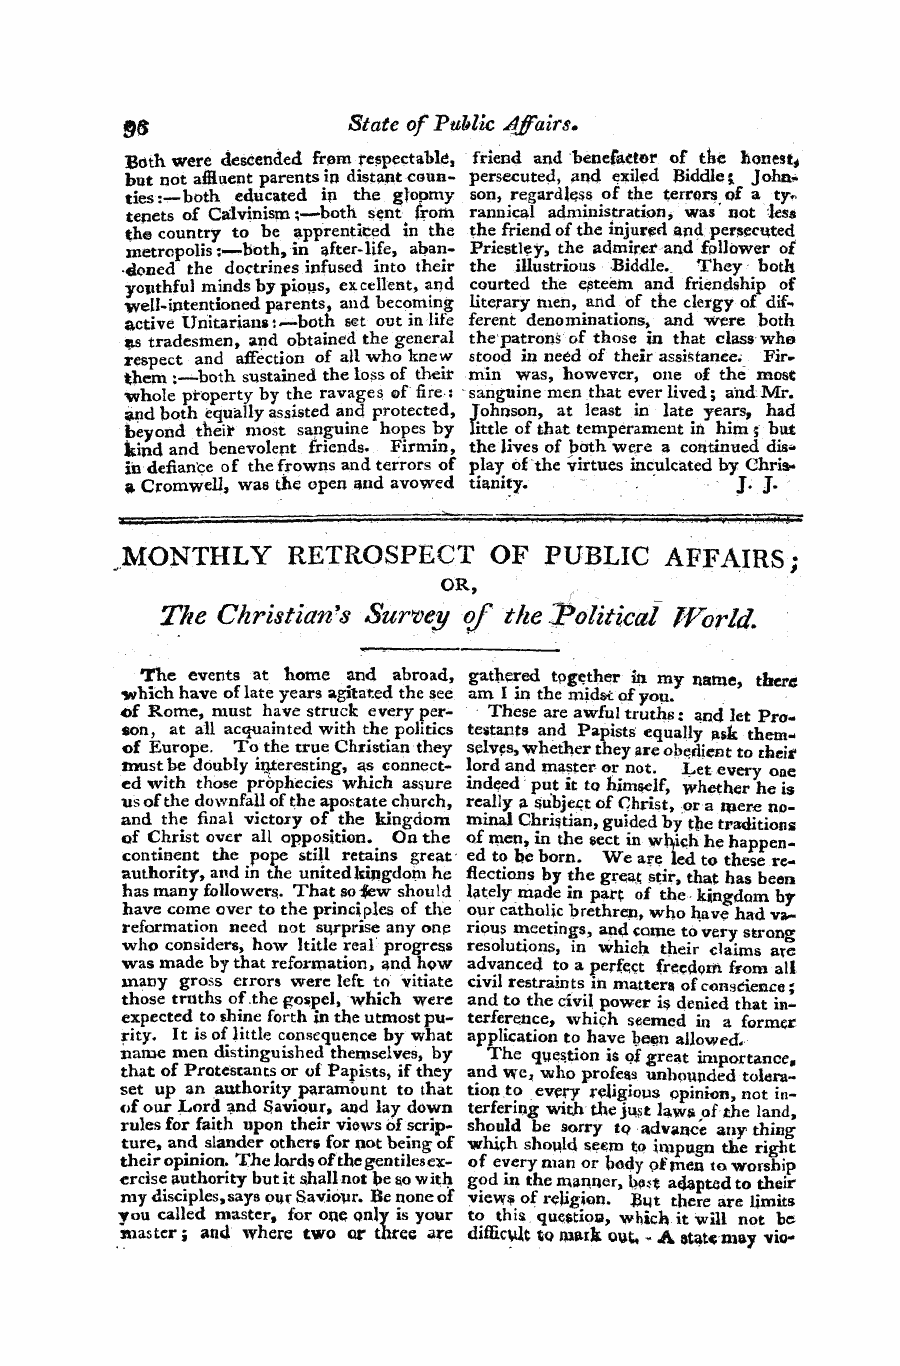 Monthly Repository (1806-1838) and Unitarian Chronicle (1832-1833): F Y, 1st edition - Monthly Retrospect Of Public Affairs; Or, ' ¦ • . ¦ ^ L " — ¦ ¦ ¦ ¦ The Christian's Survey Of The Political World.